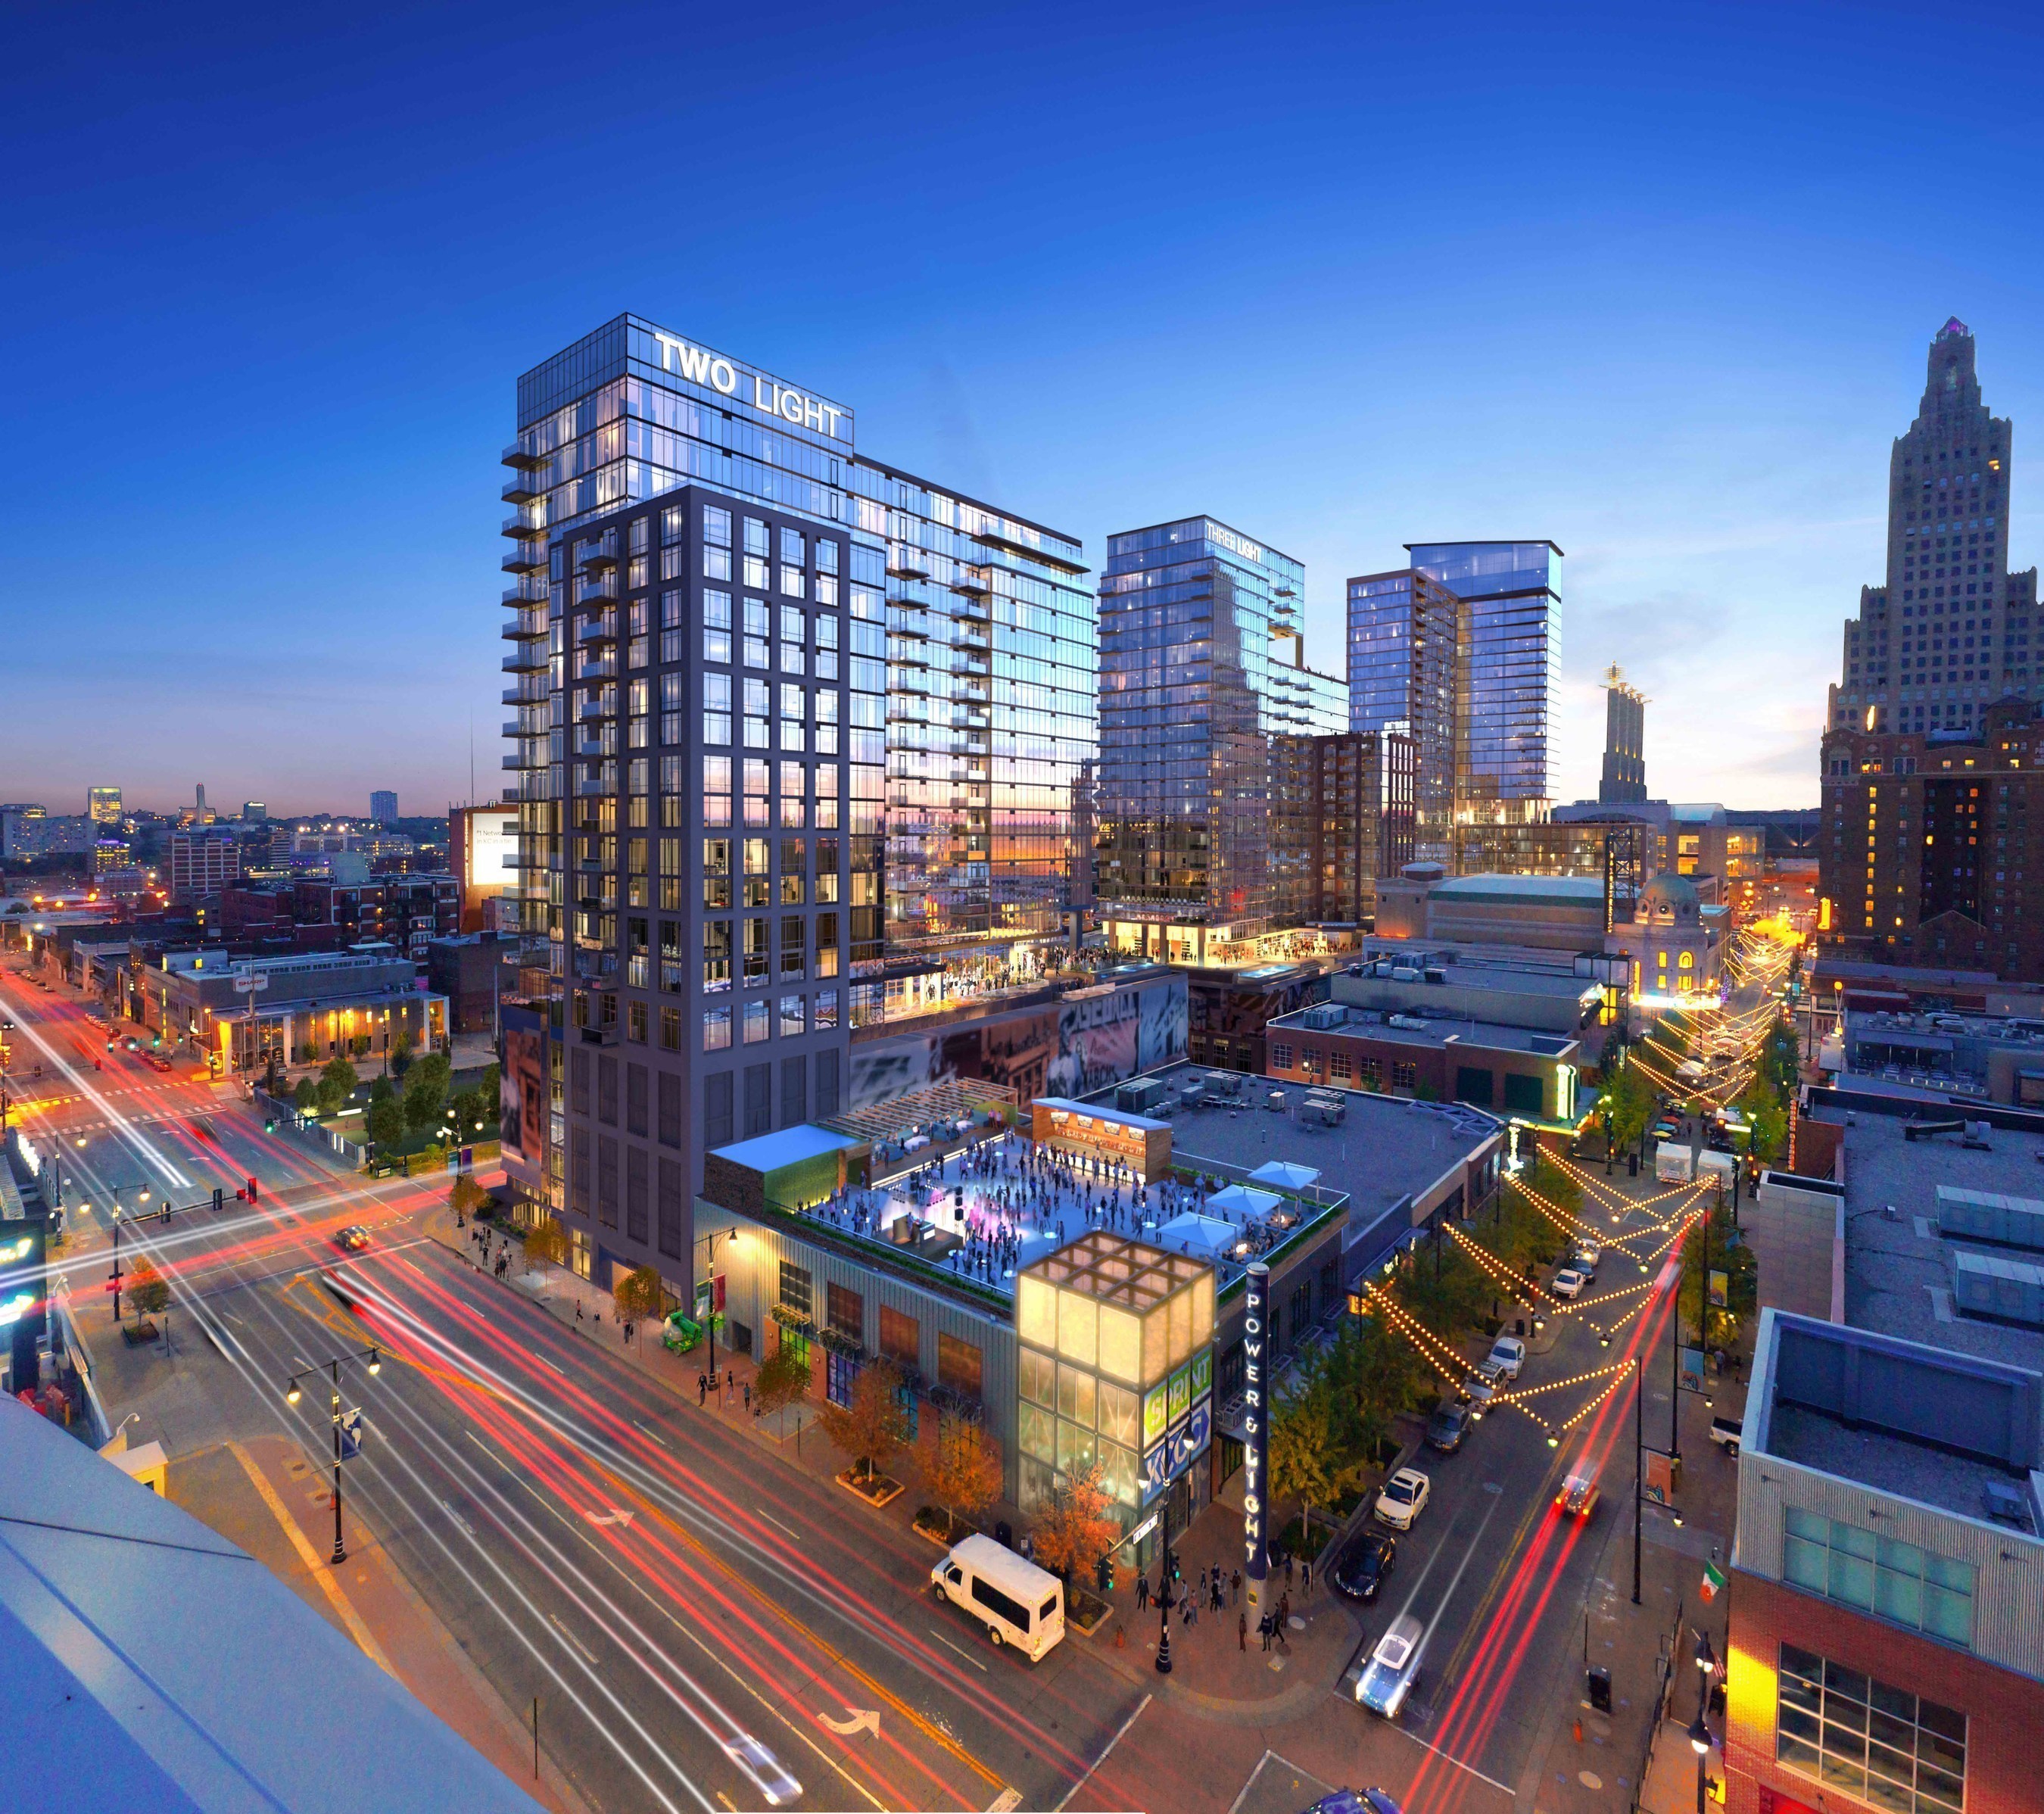 Scheduled to open Spring 2018, Two Light will join One Light as the second new construction high-rise apartment building in the last 50 years in downtown Kansas City, MO